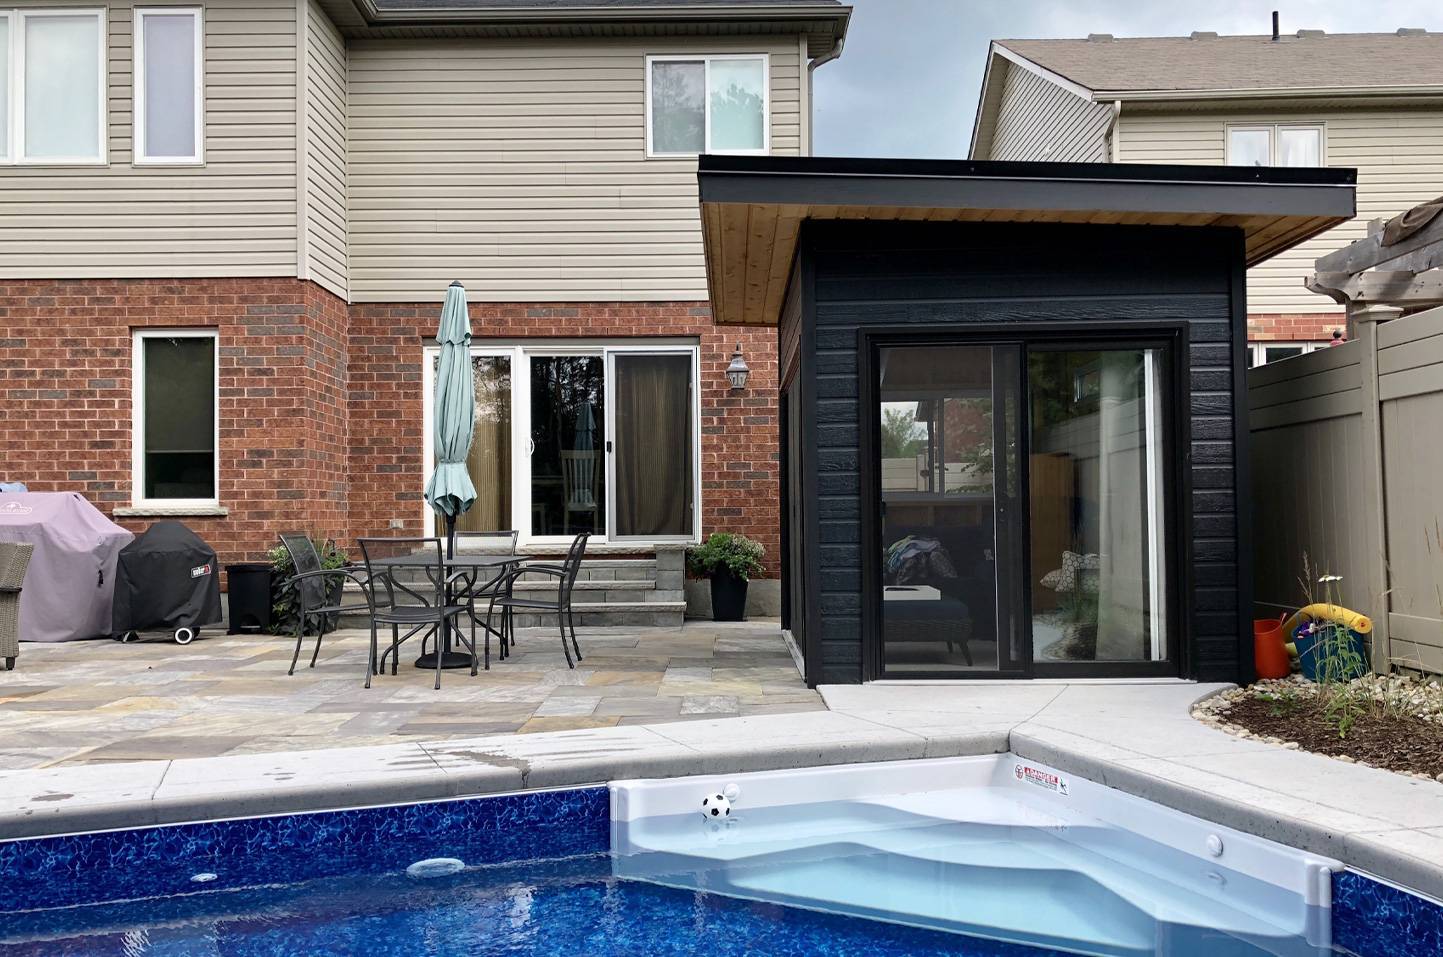 Front View of 8' x 11' Pool Cabana Verana Design located in Guelph, Ontario - Summerwood Products